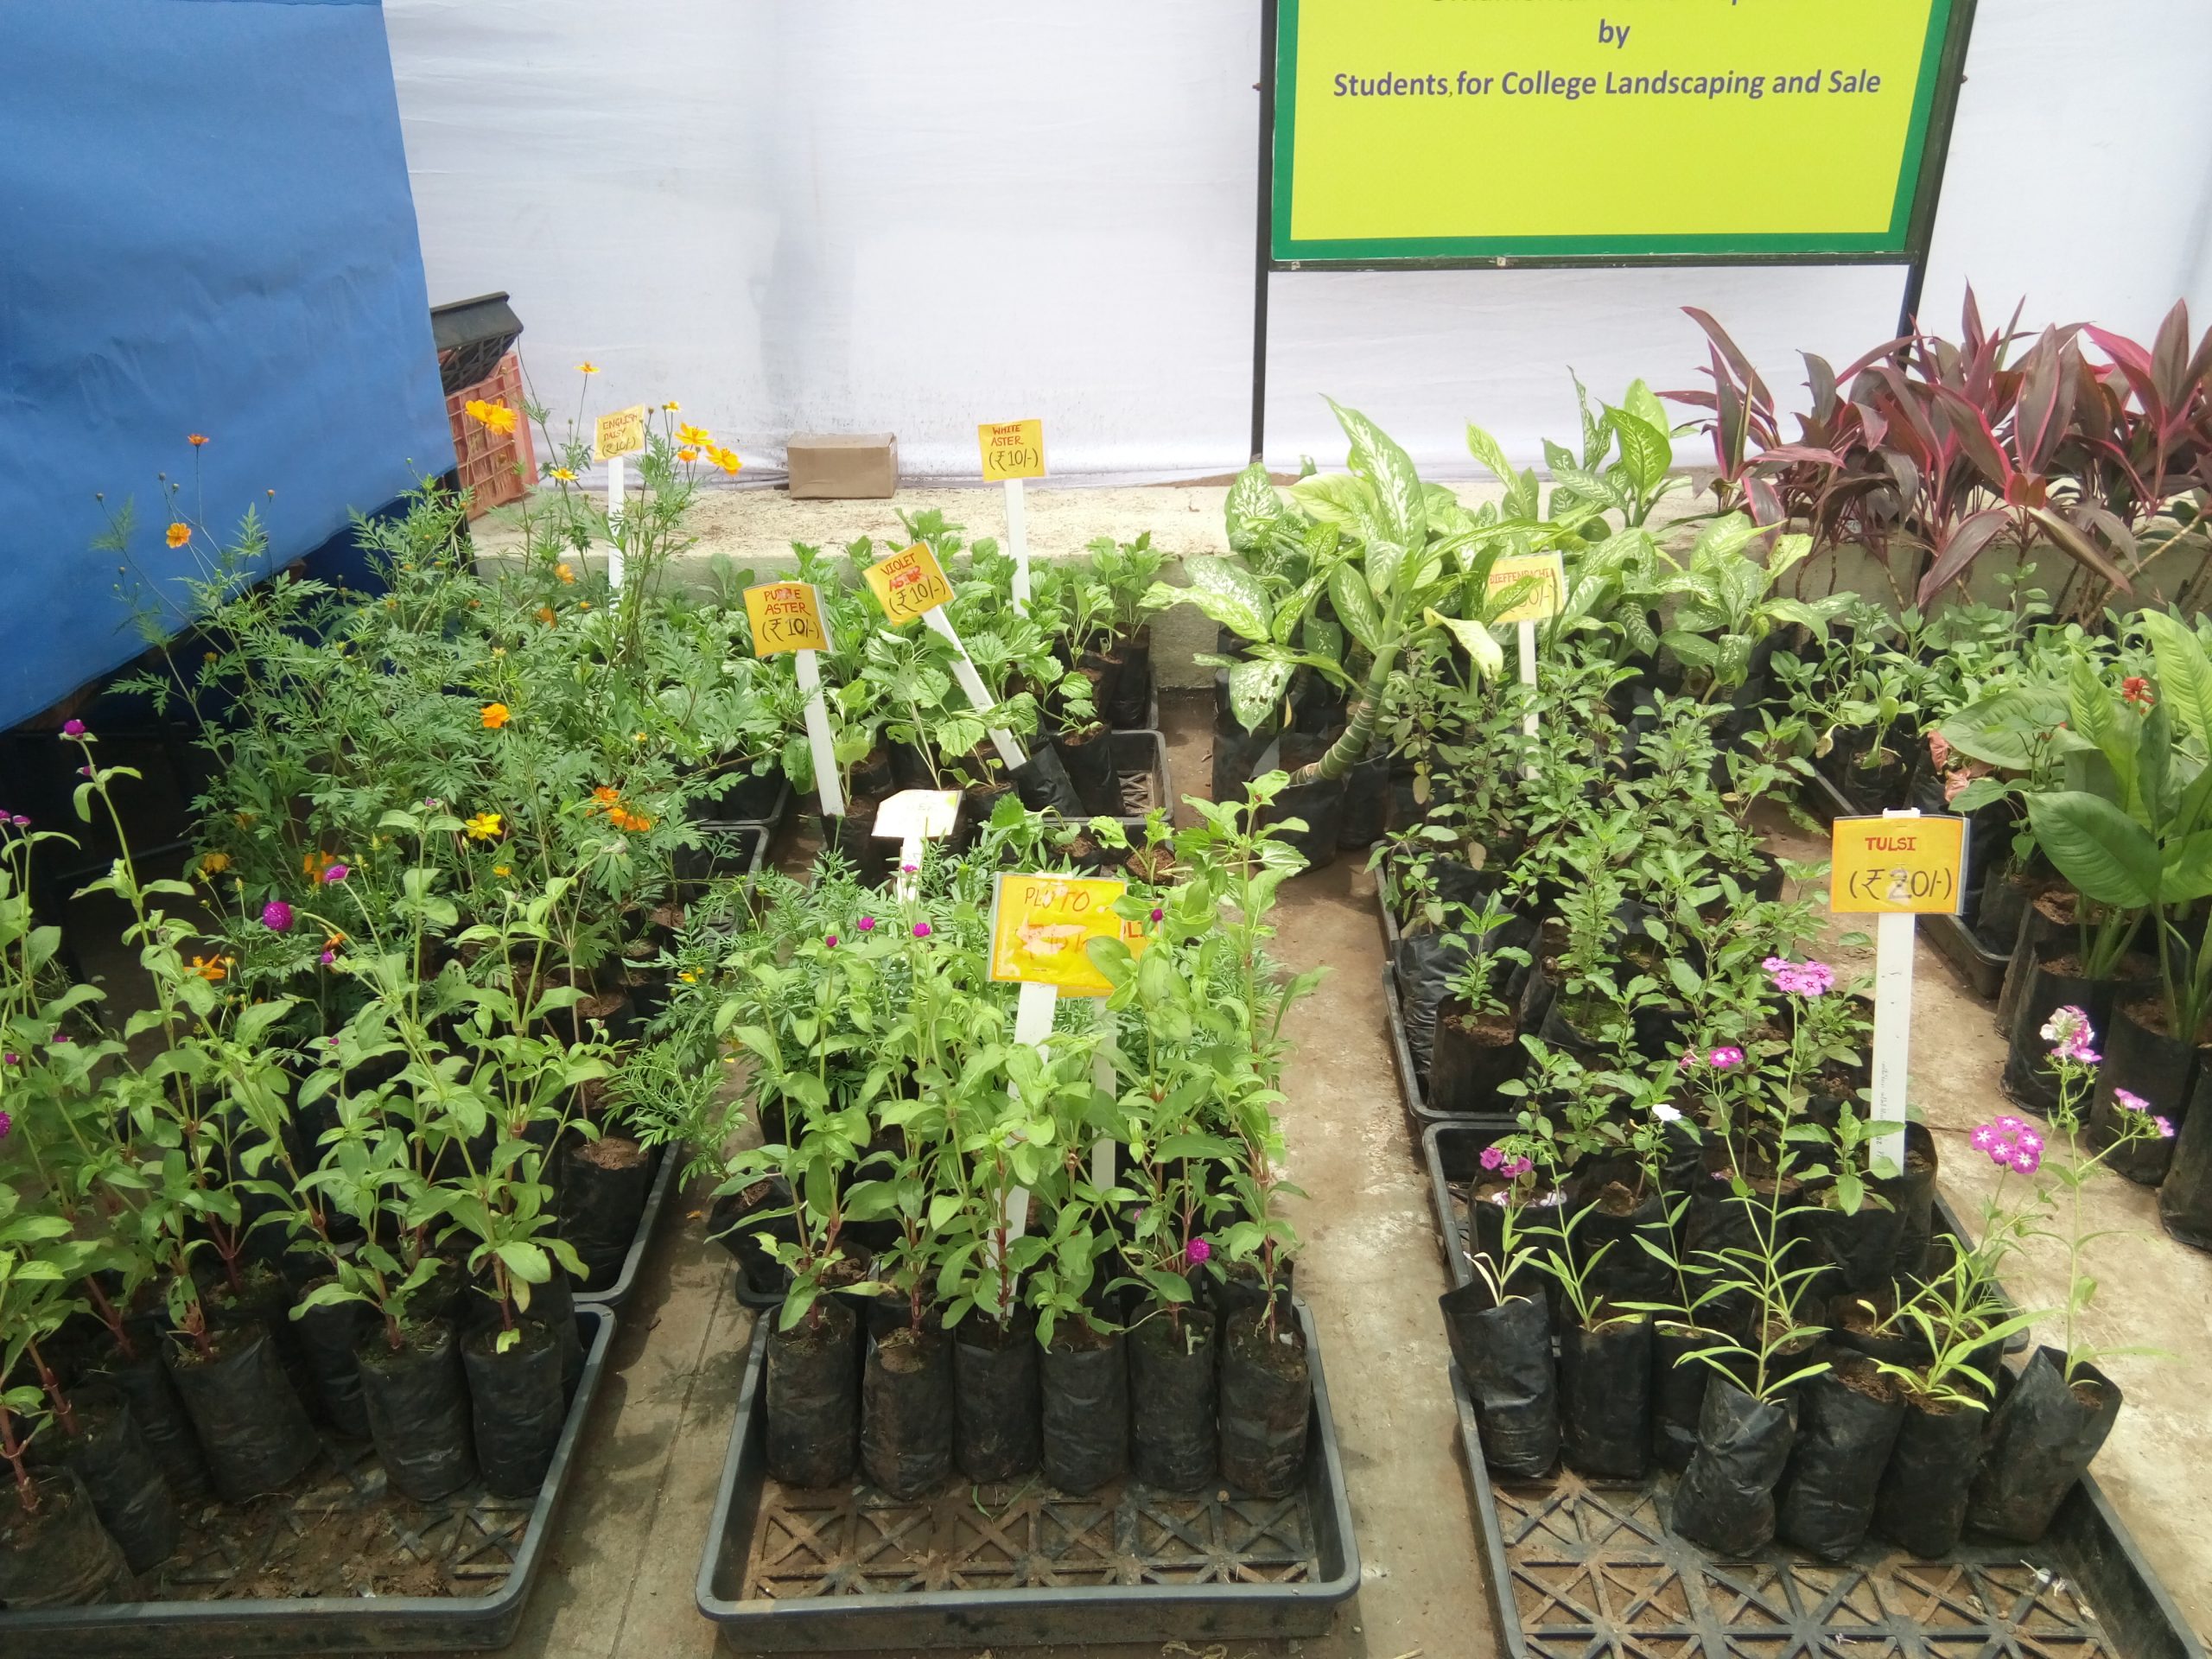 Plants in a nursery horticulture